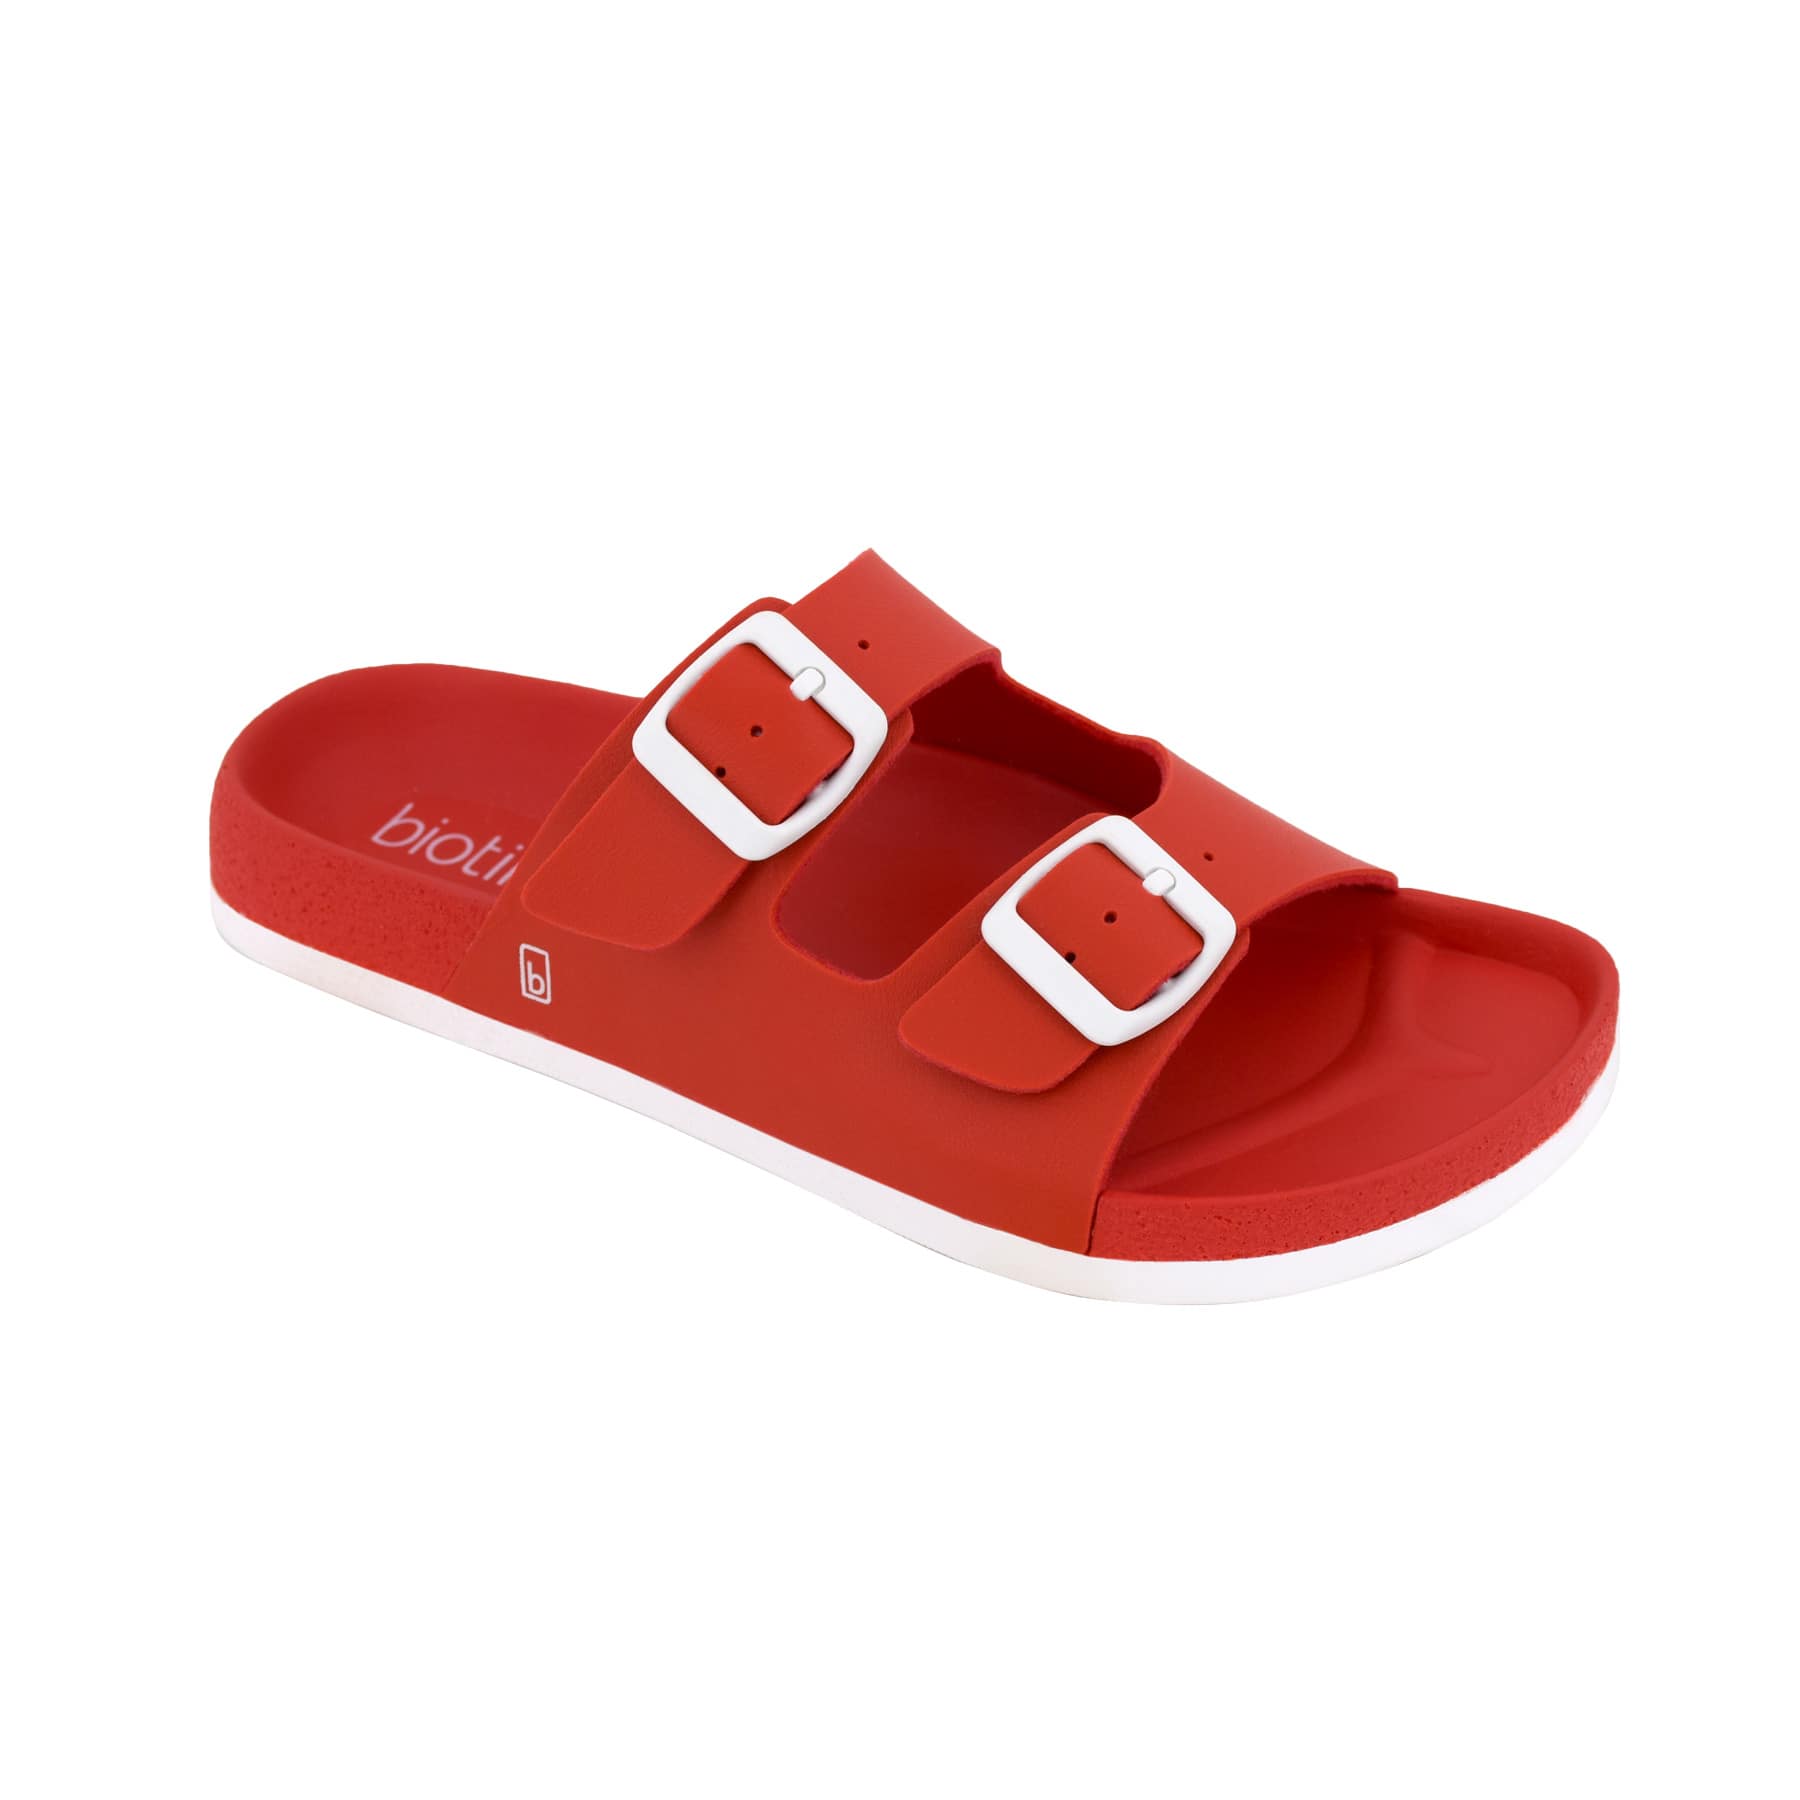 Biotime Women's Bali Sandals with contoured footbed.